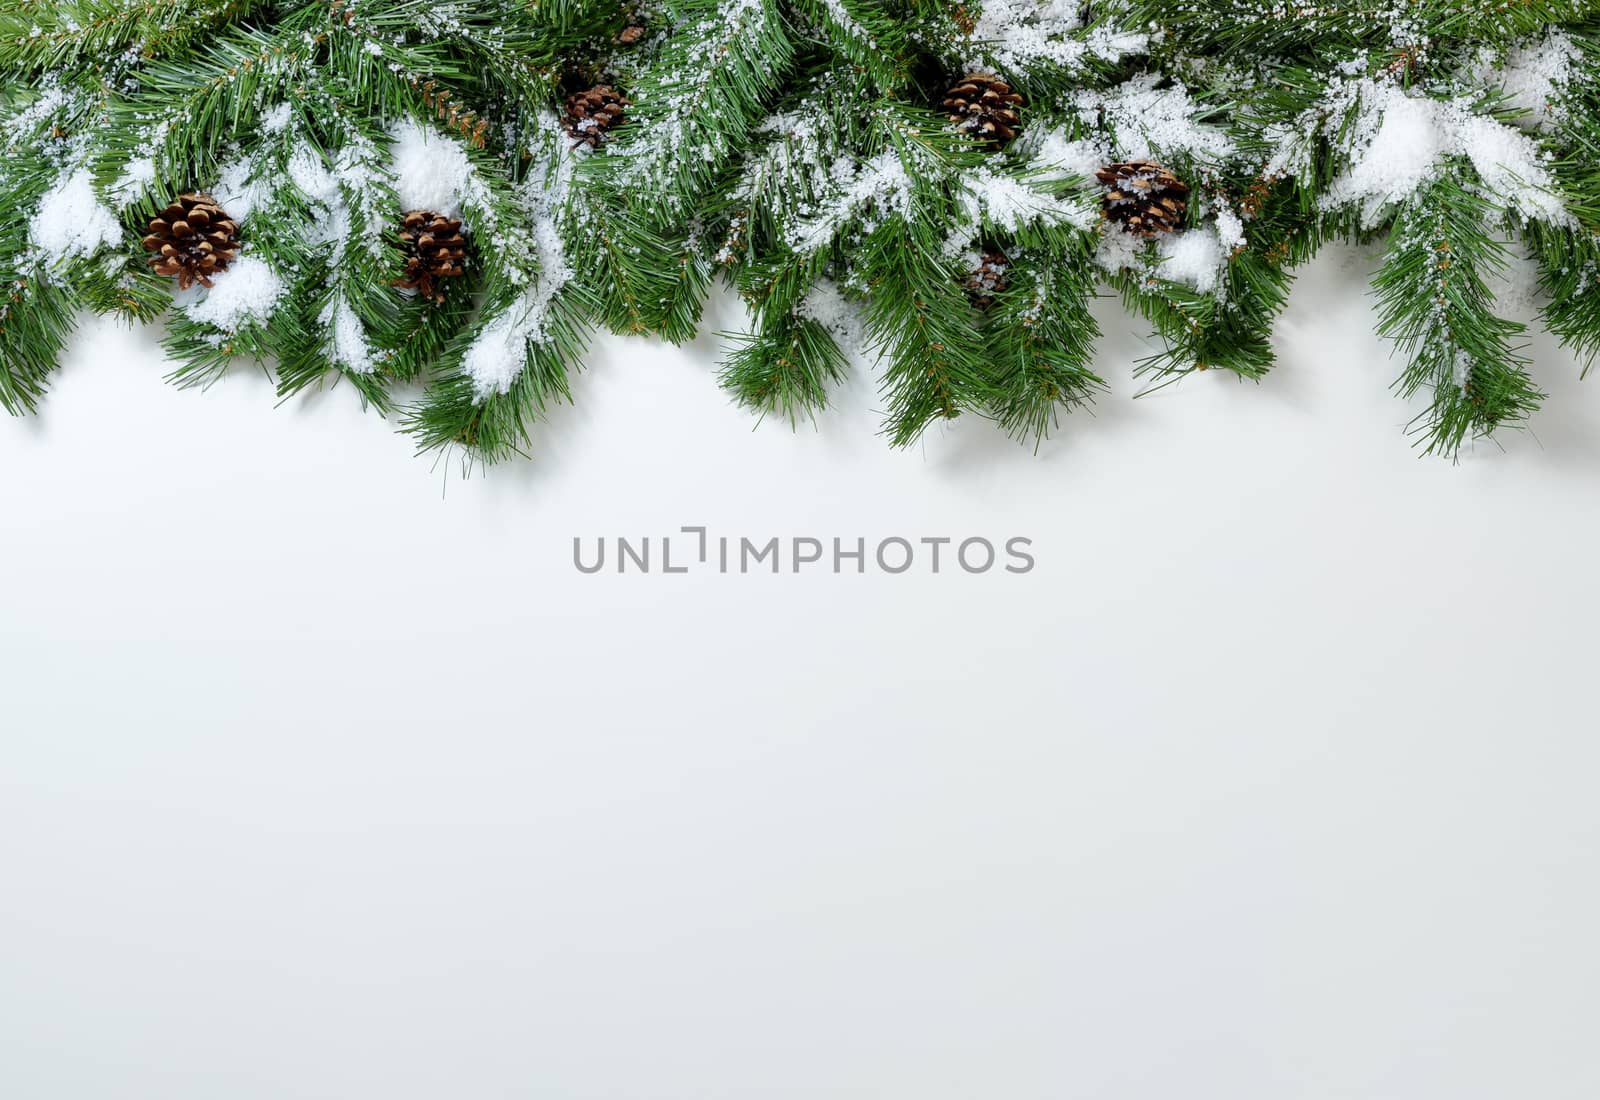 Snowy Christmas tree branches and pinecones on white background 